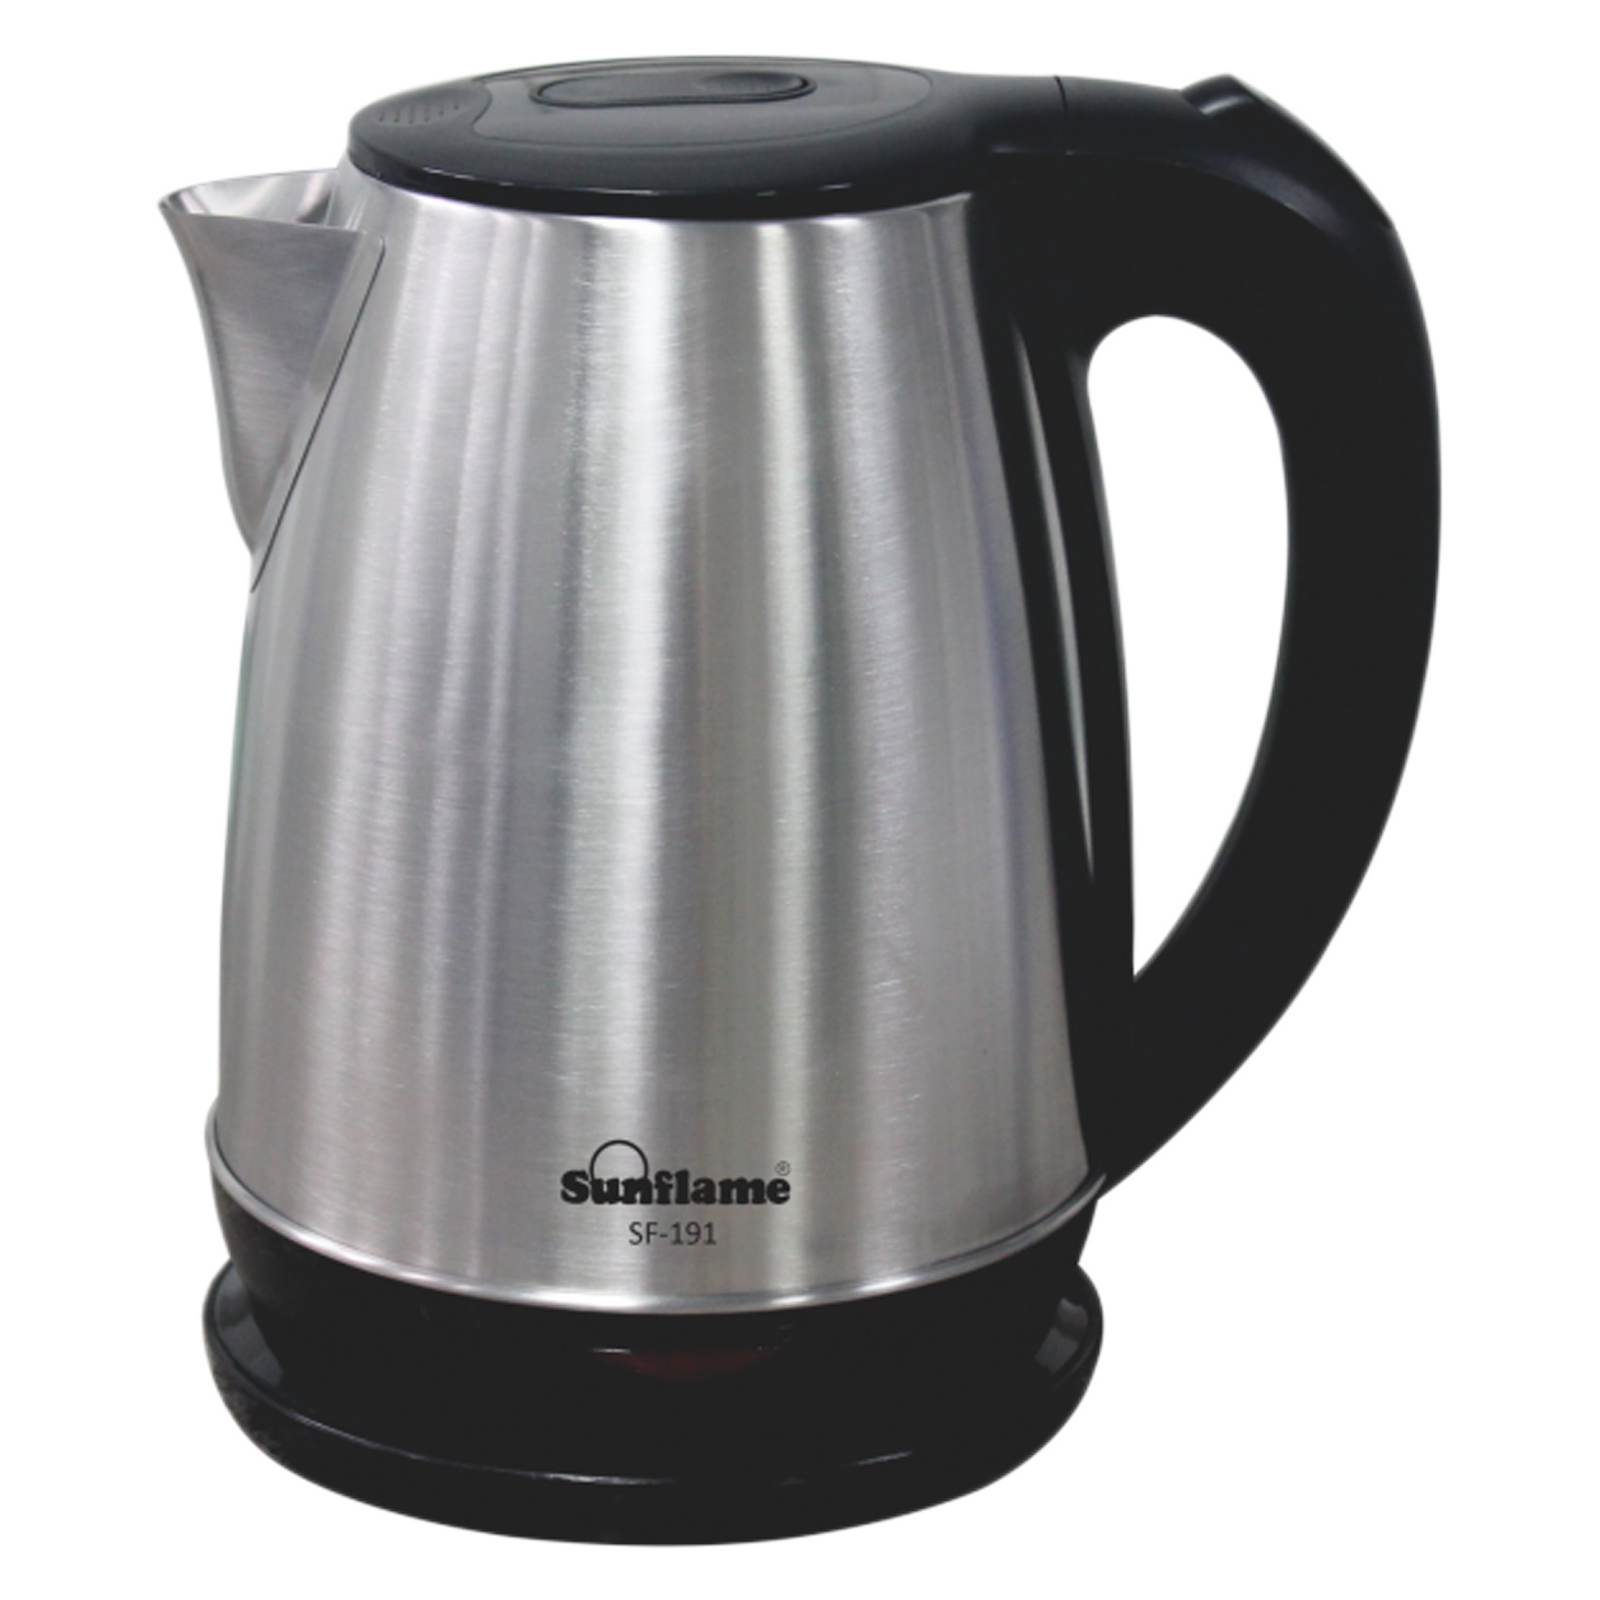 Sunflame 1.8L 1500 Watts Electric Kettle (Variable Temperature Control, SF-191, Steel)_1